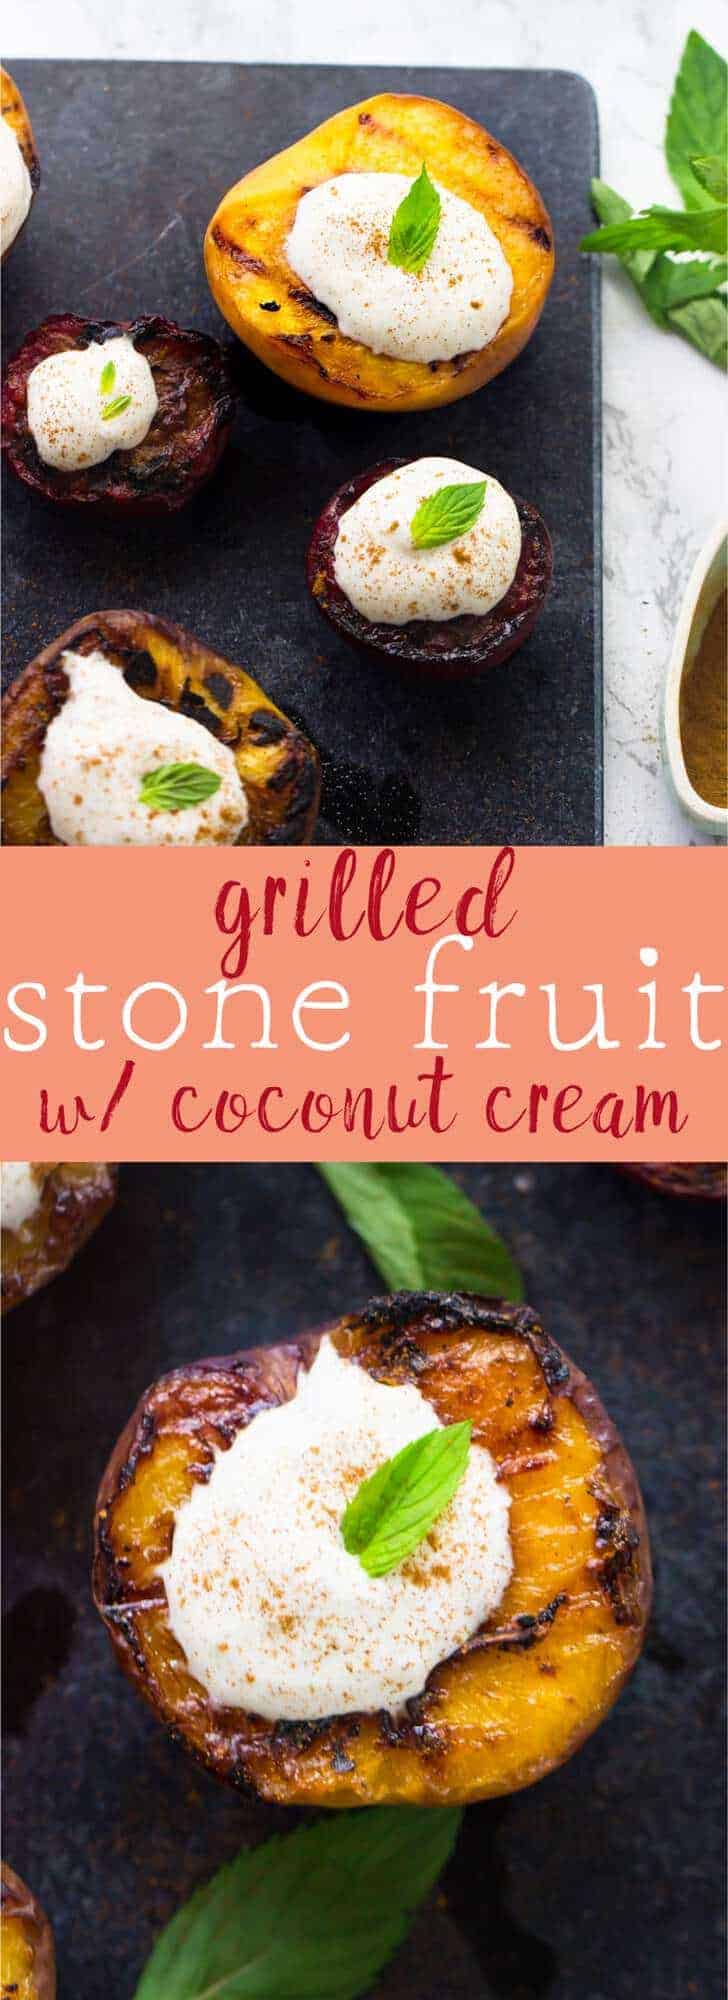 This Grilled Stone Fruit makes a delicious, fresh and healthy summer dessert! It's served with a sweet homemade coconut cream in just 15 minutes! via https://jessicainthekitchen.com